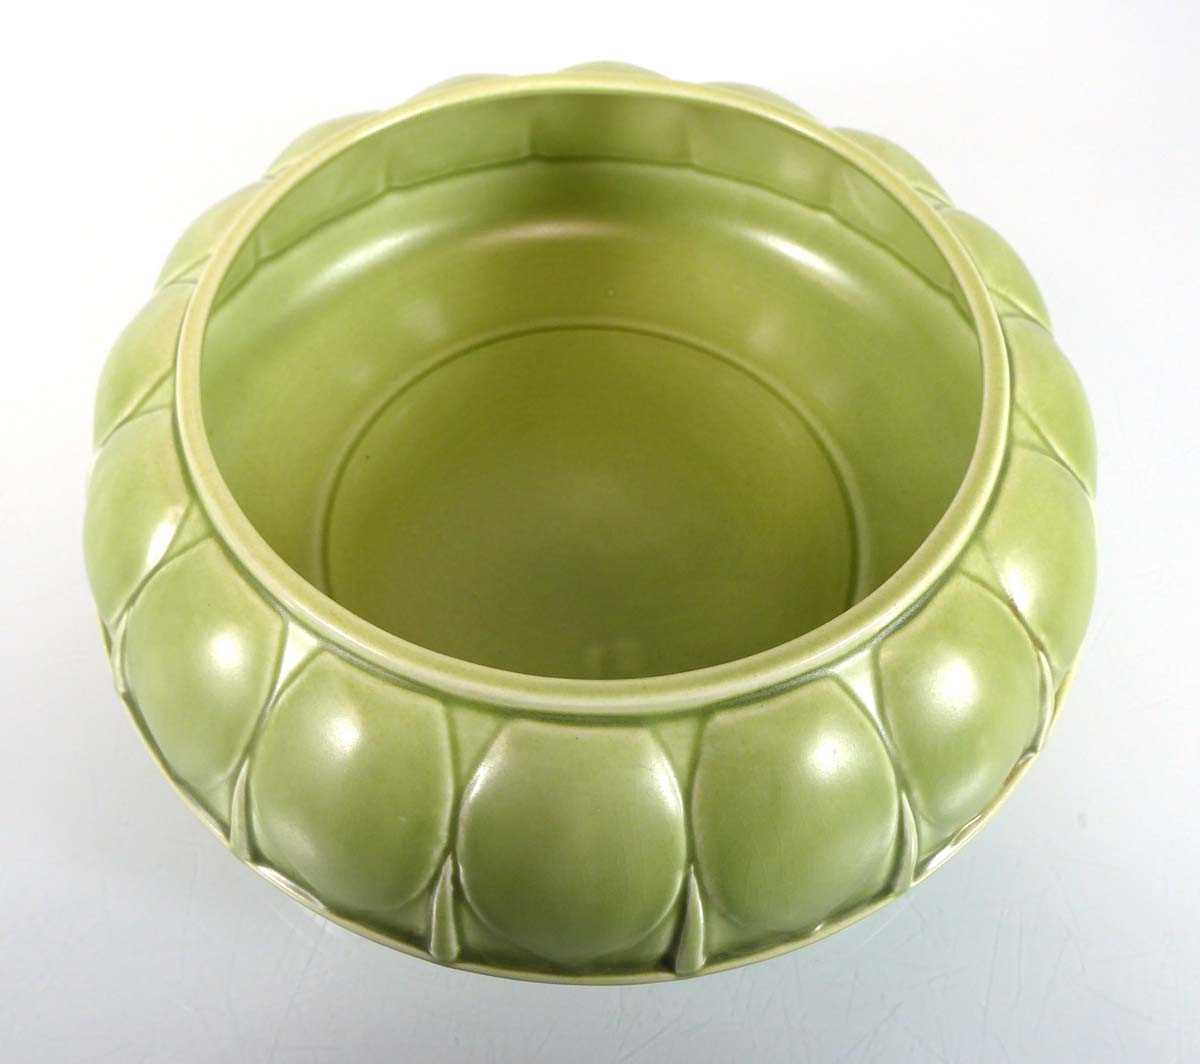 A Shorter & Sons shallow jardinière decorated in a pale green glaze, d. 25 cm - Image 2 of 2